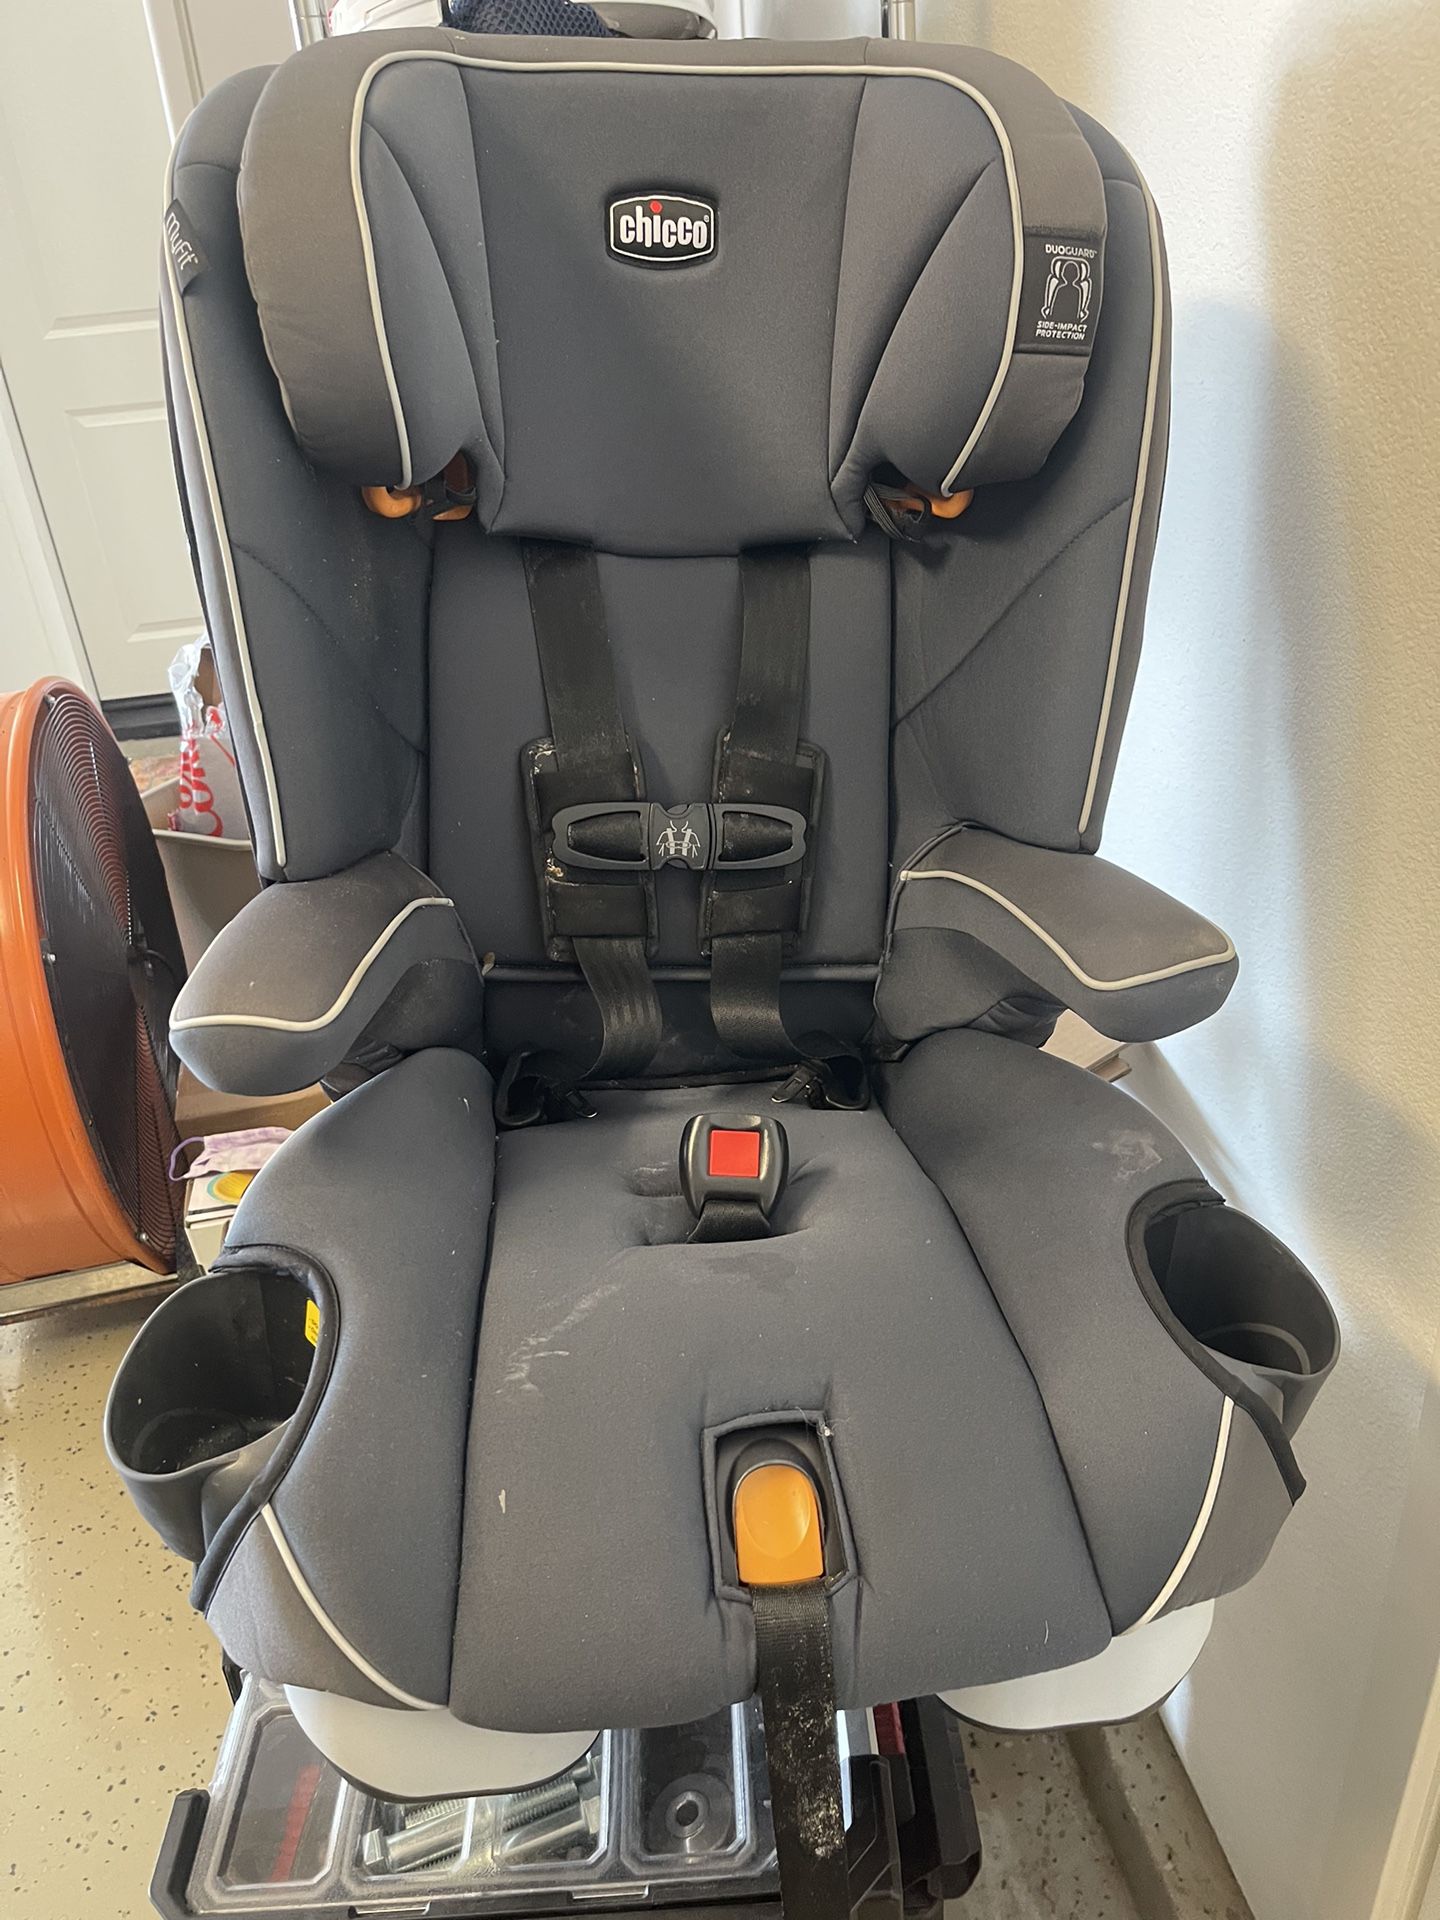  Chicco “My Fit” car seat